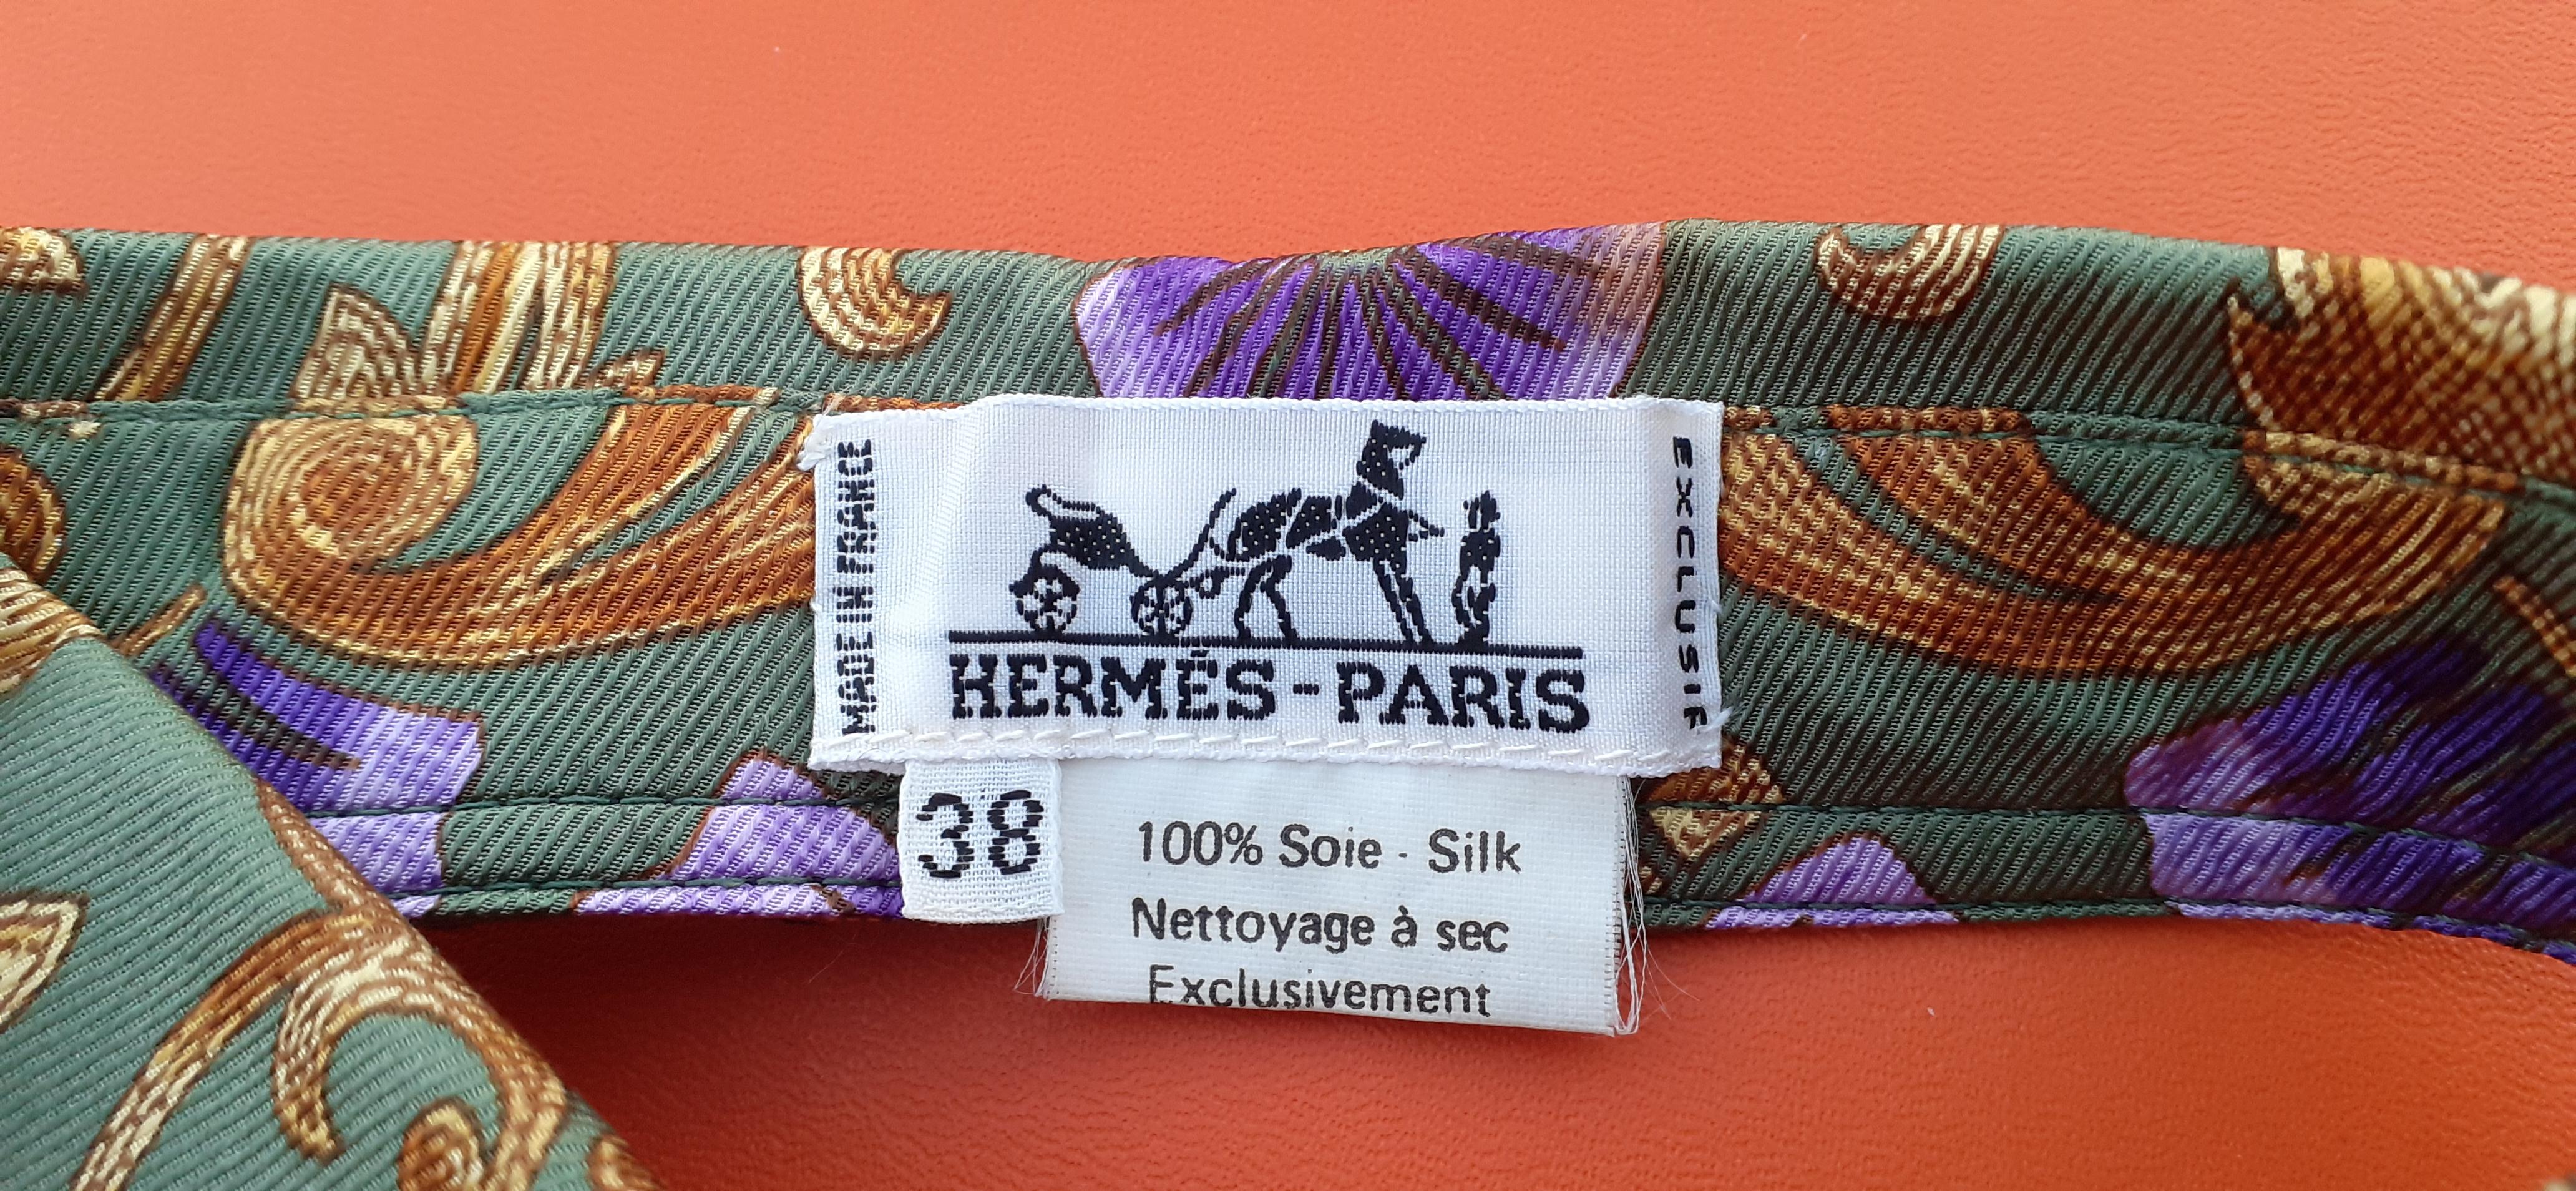 Amazing and Rare Authentic Hermès Set of matching collar and cuffs

From the 